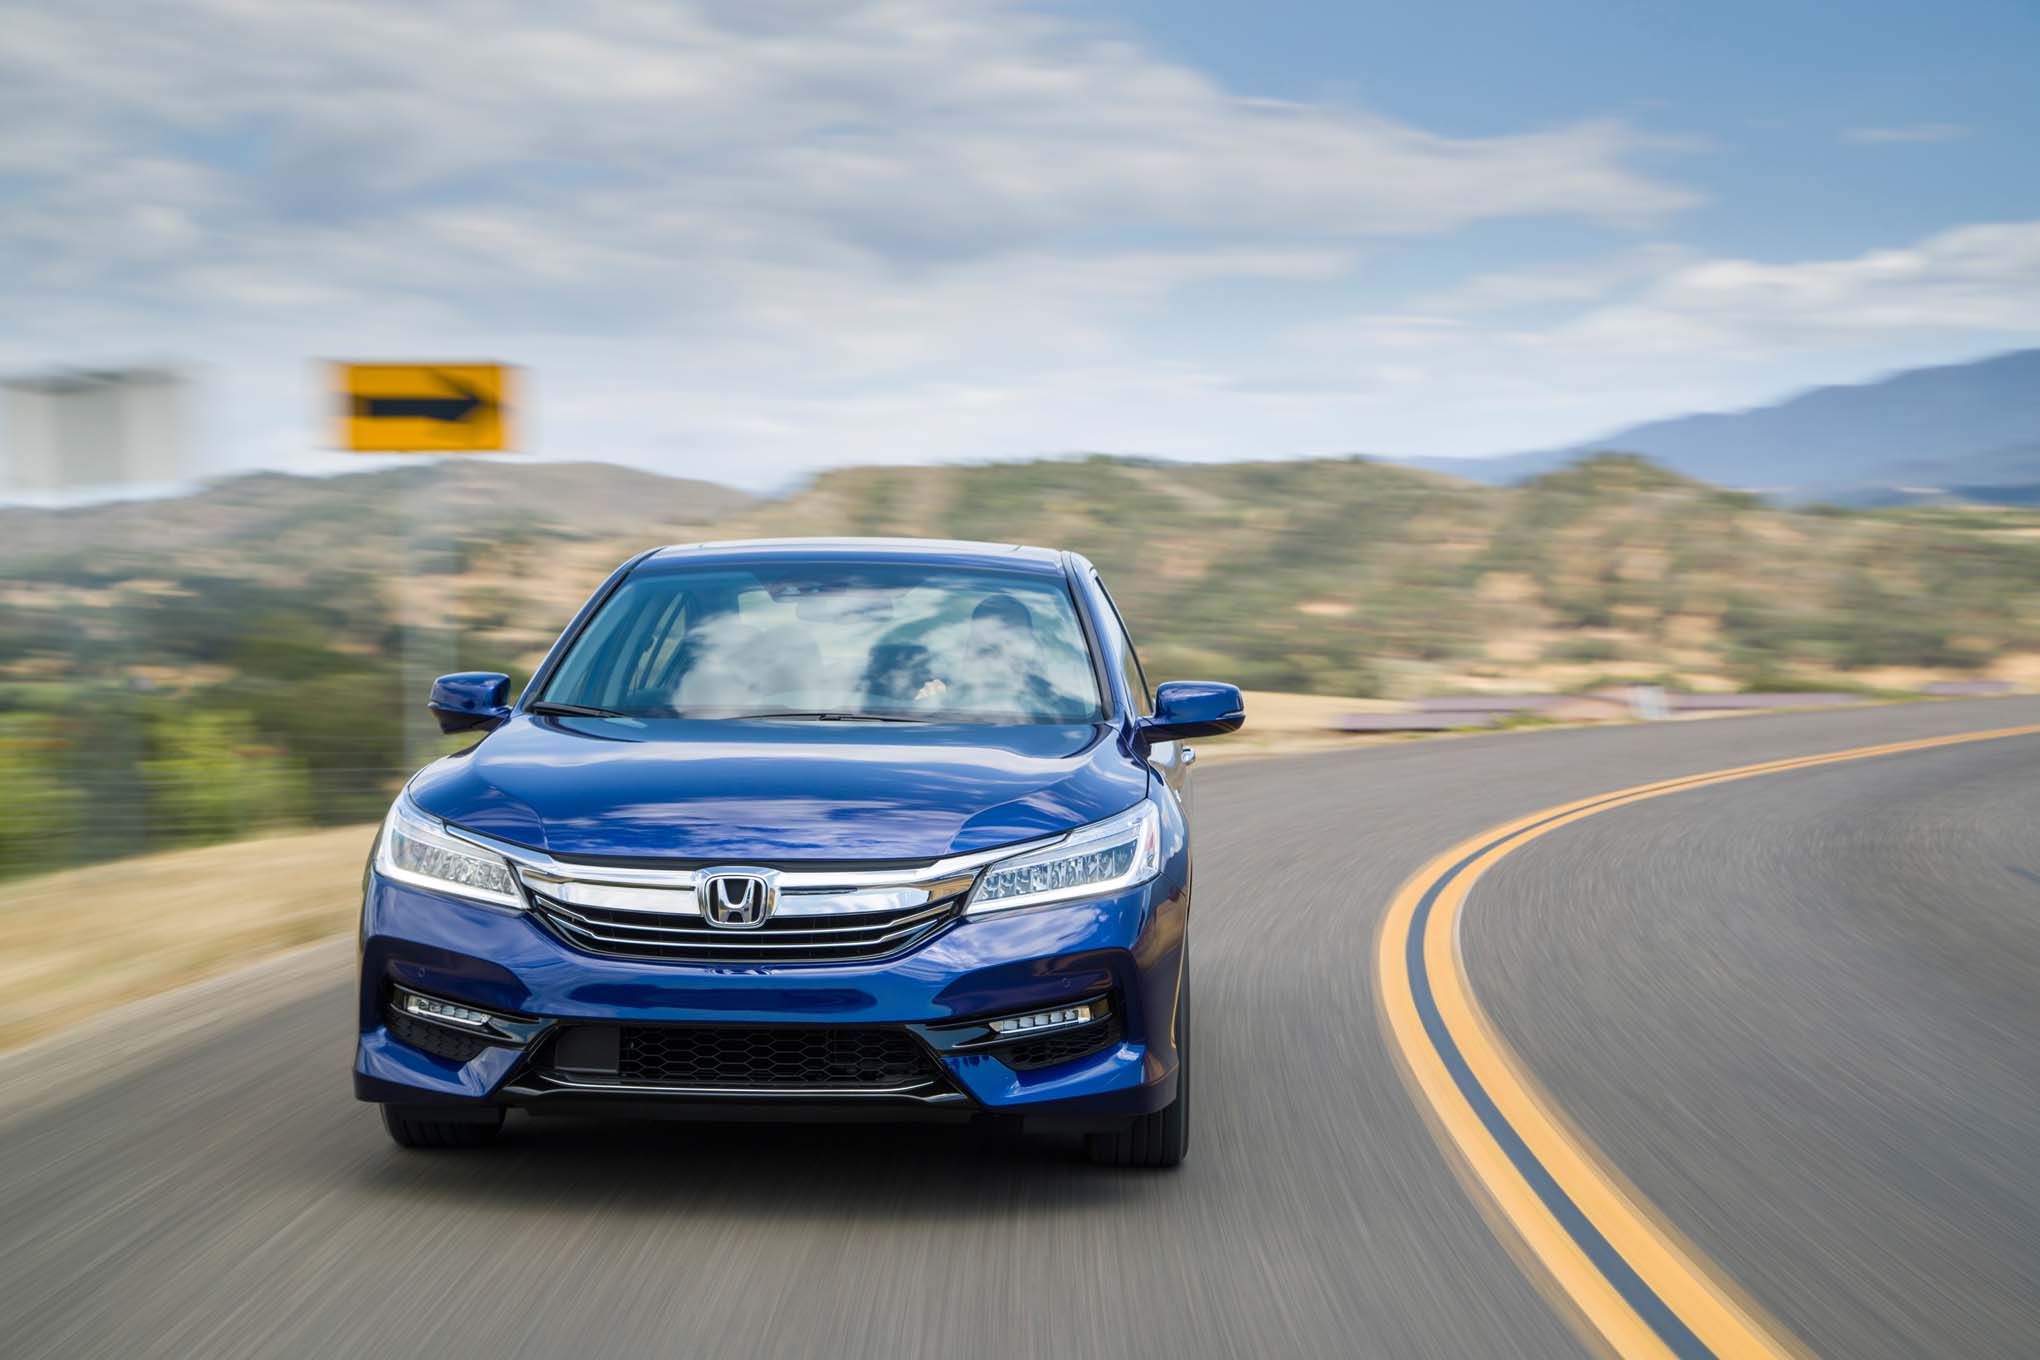 Honda Accord 2017 Review And Redesigned release date, price